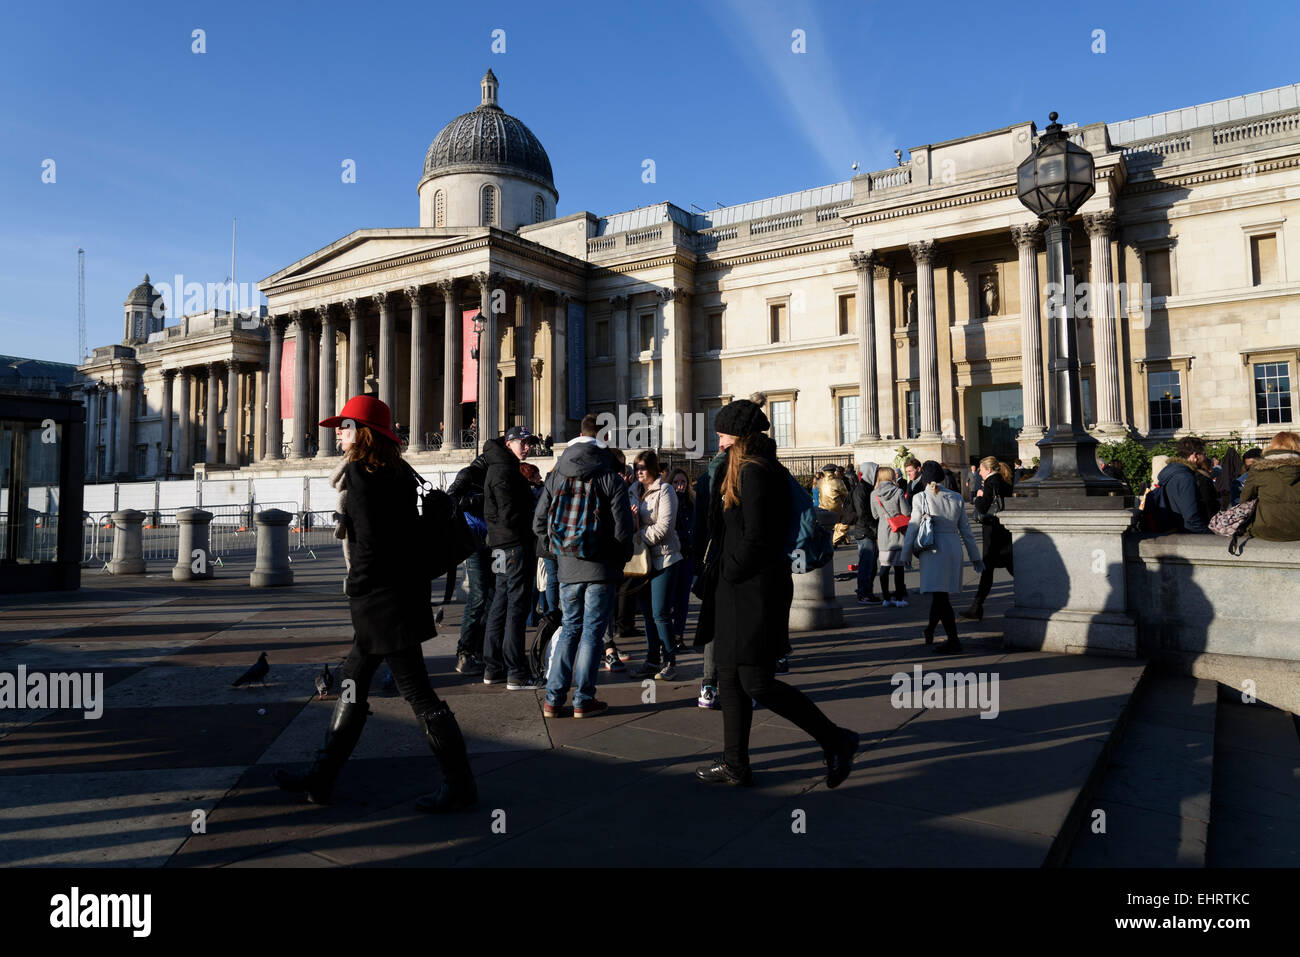 Crowd in Trafalgar Square in front of the National Gallery, London. Stock Photo